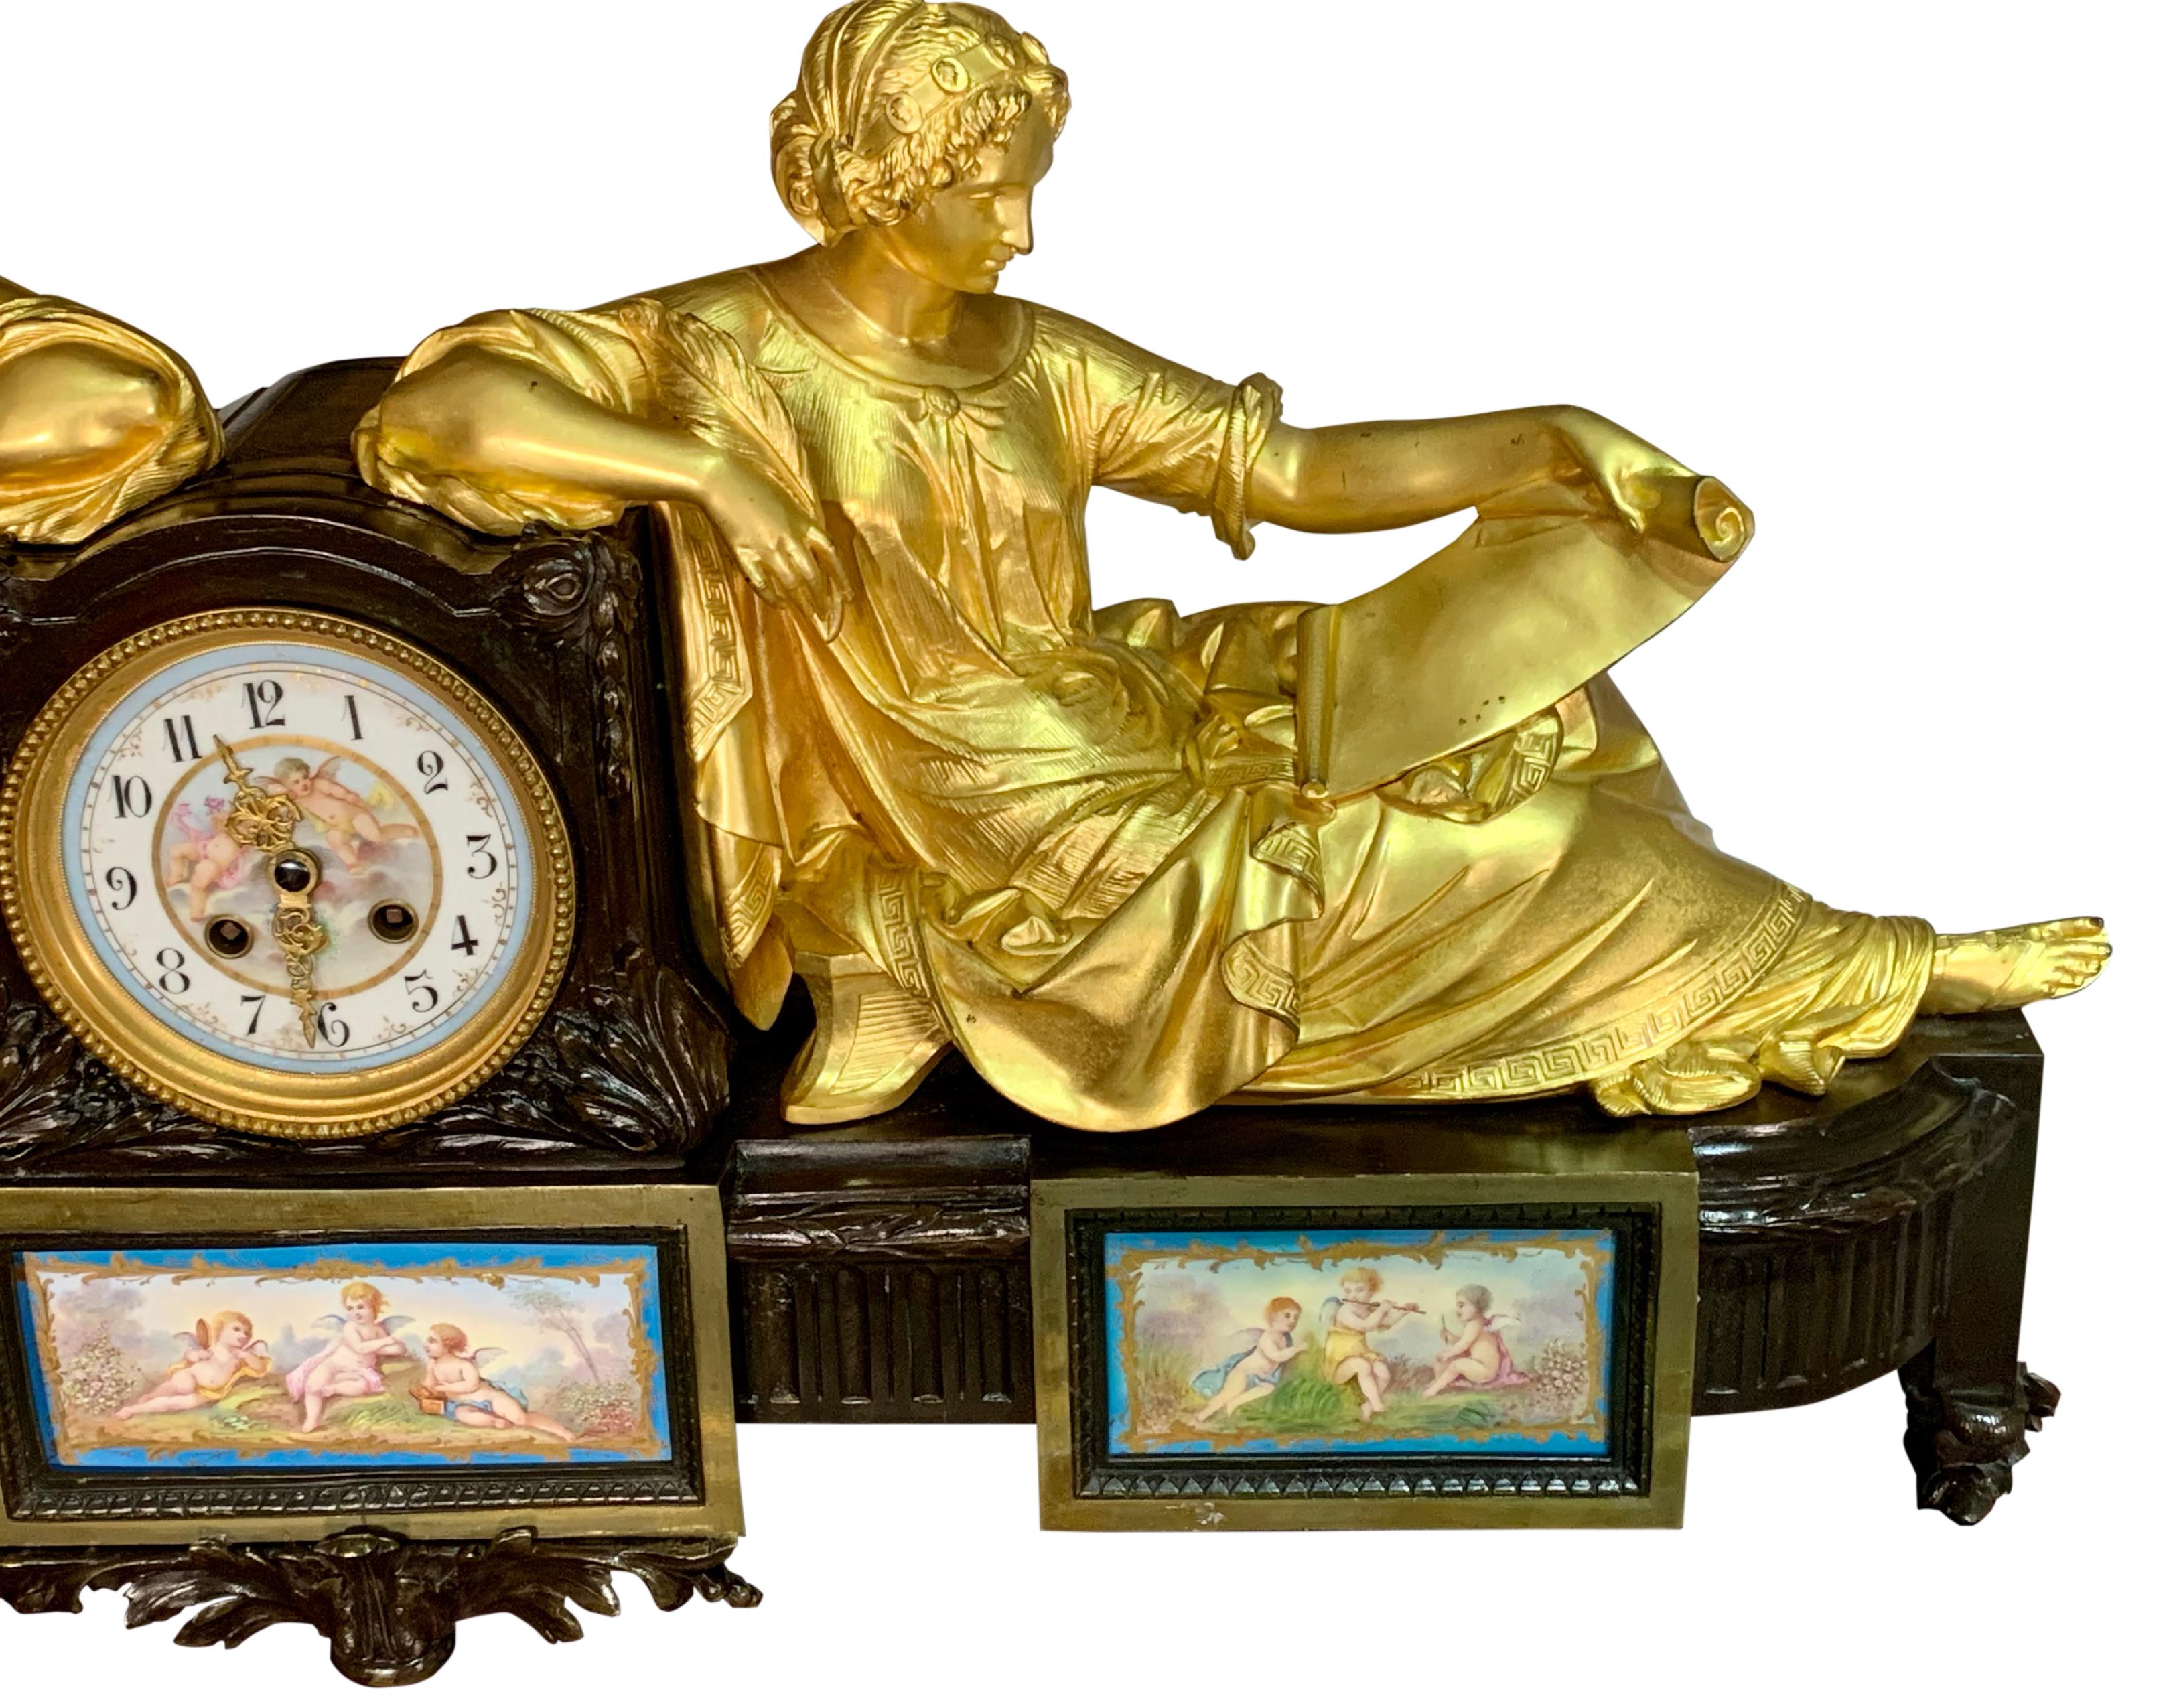 A magnificent French mantel clock in patinated bronze and original ormolu. Modeled with figures of two classically dressed females sitting back to back against the clock drum and reading from ormolu book and scroll. The porcelain dial painted with